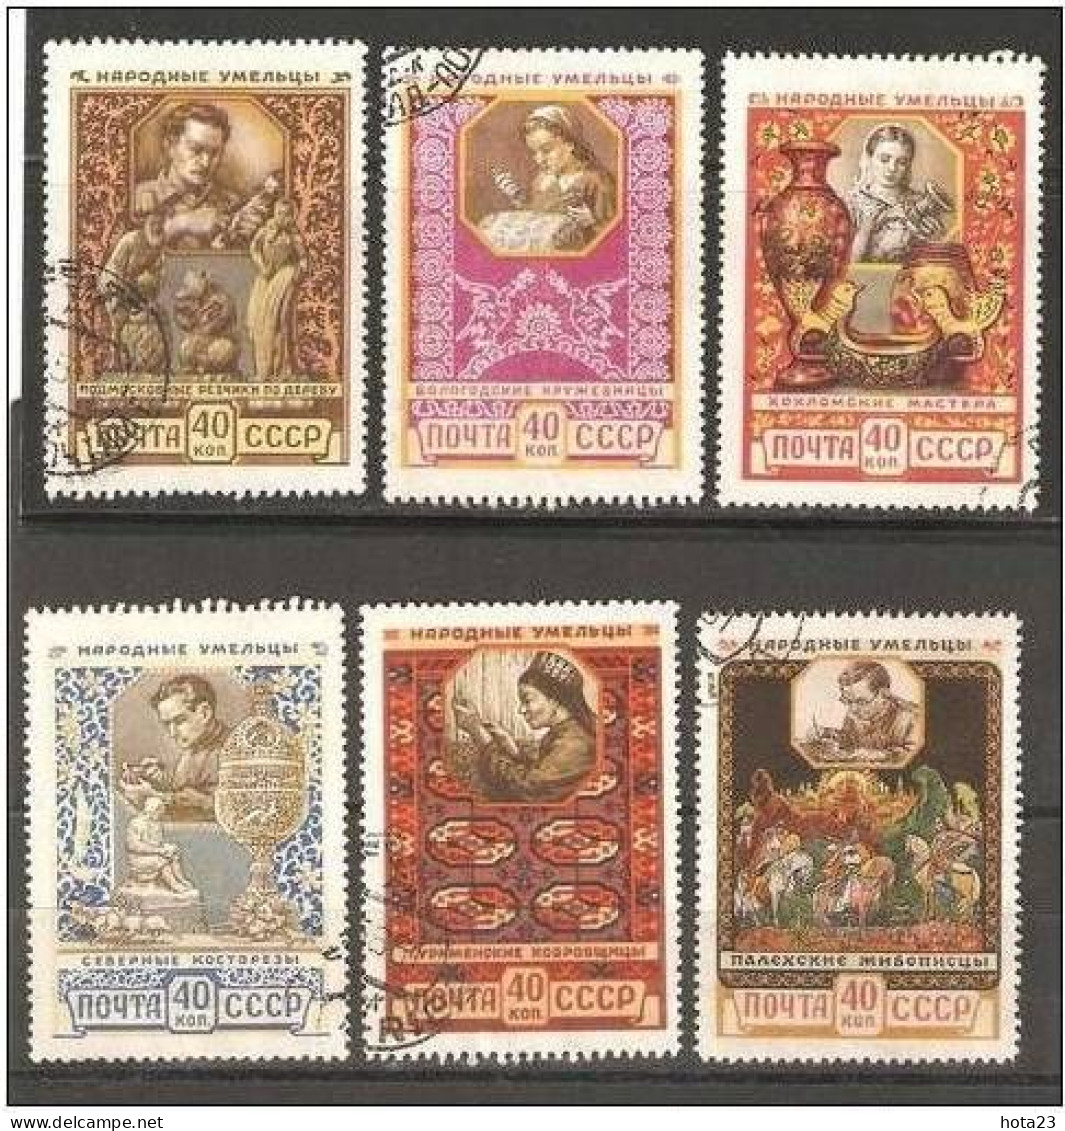 (!) RUSSIA/USSR 1957-58,National Handcrafts,Sc 1924-29 VF USED - Oblitérés